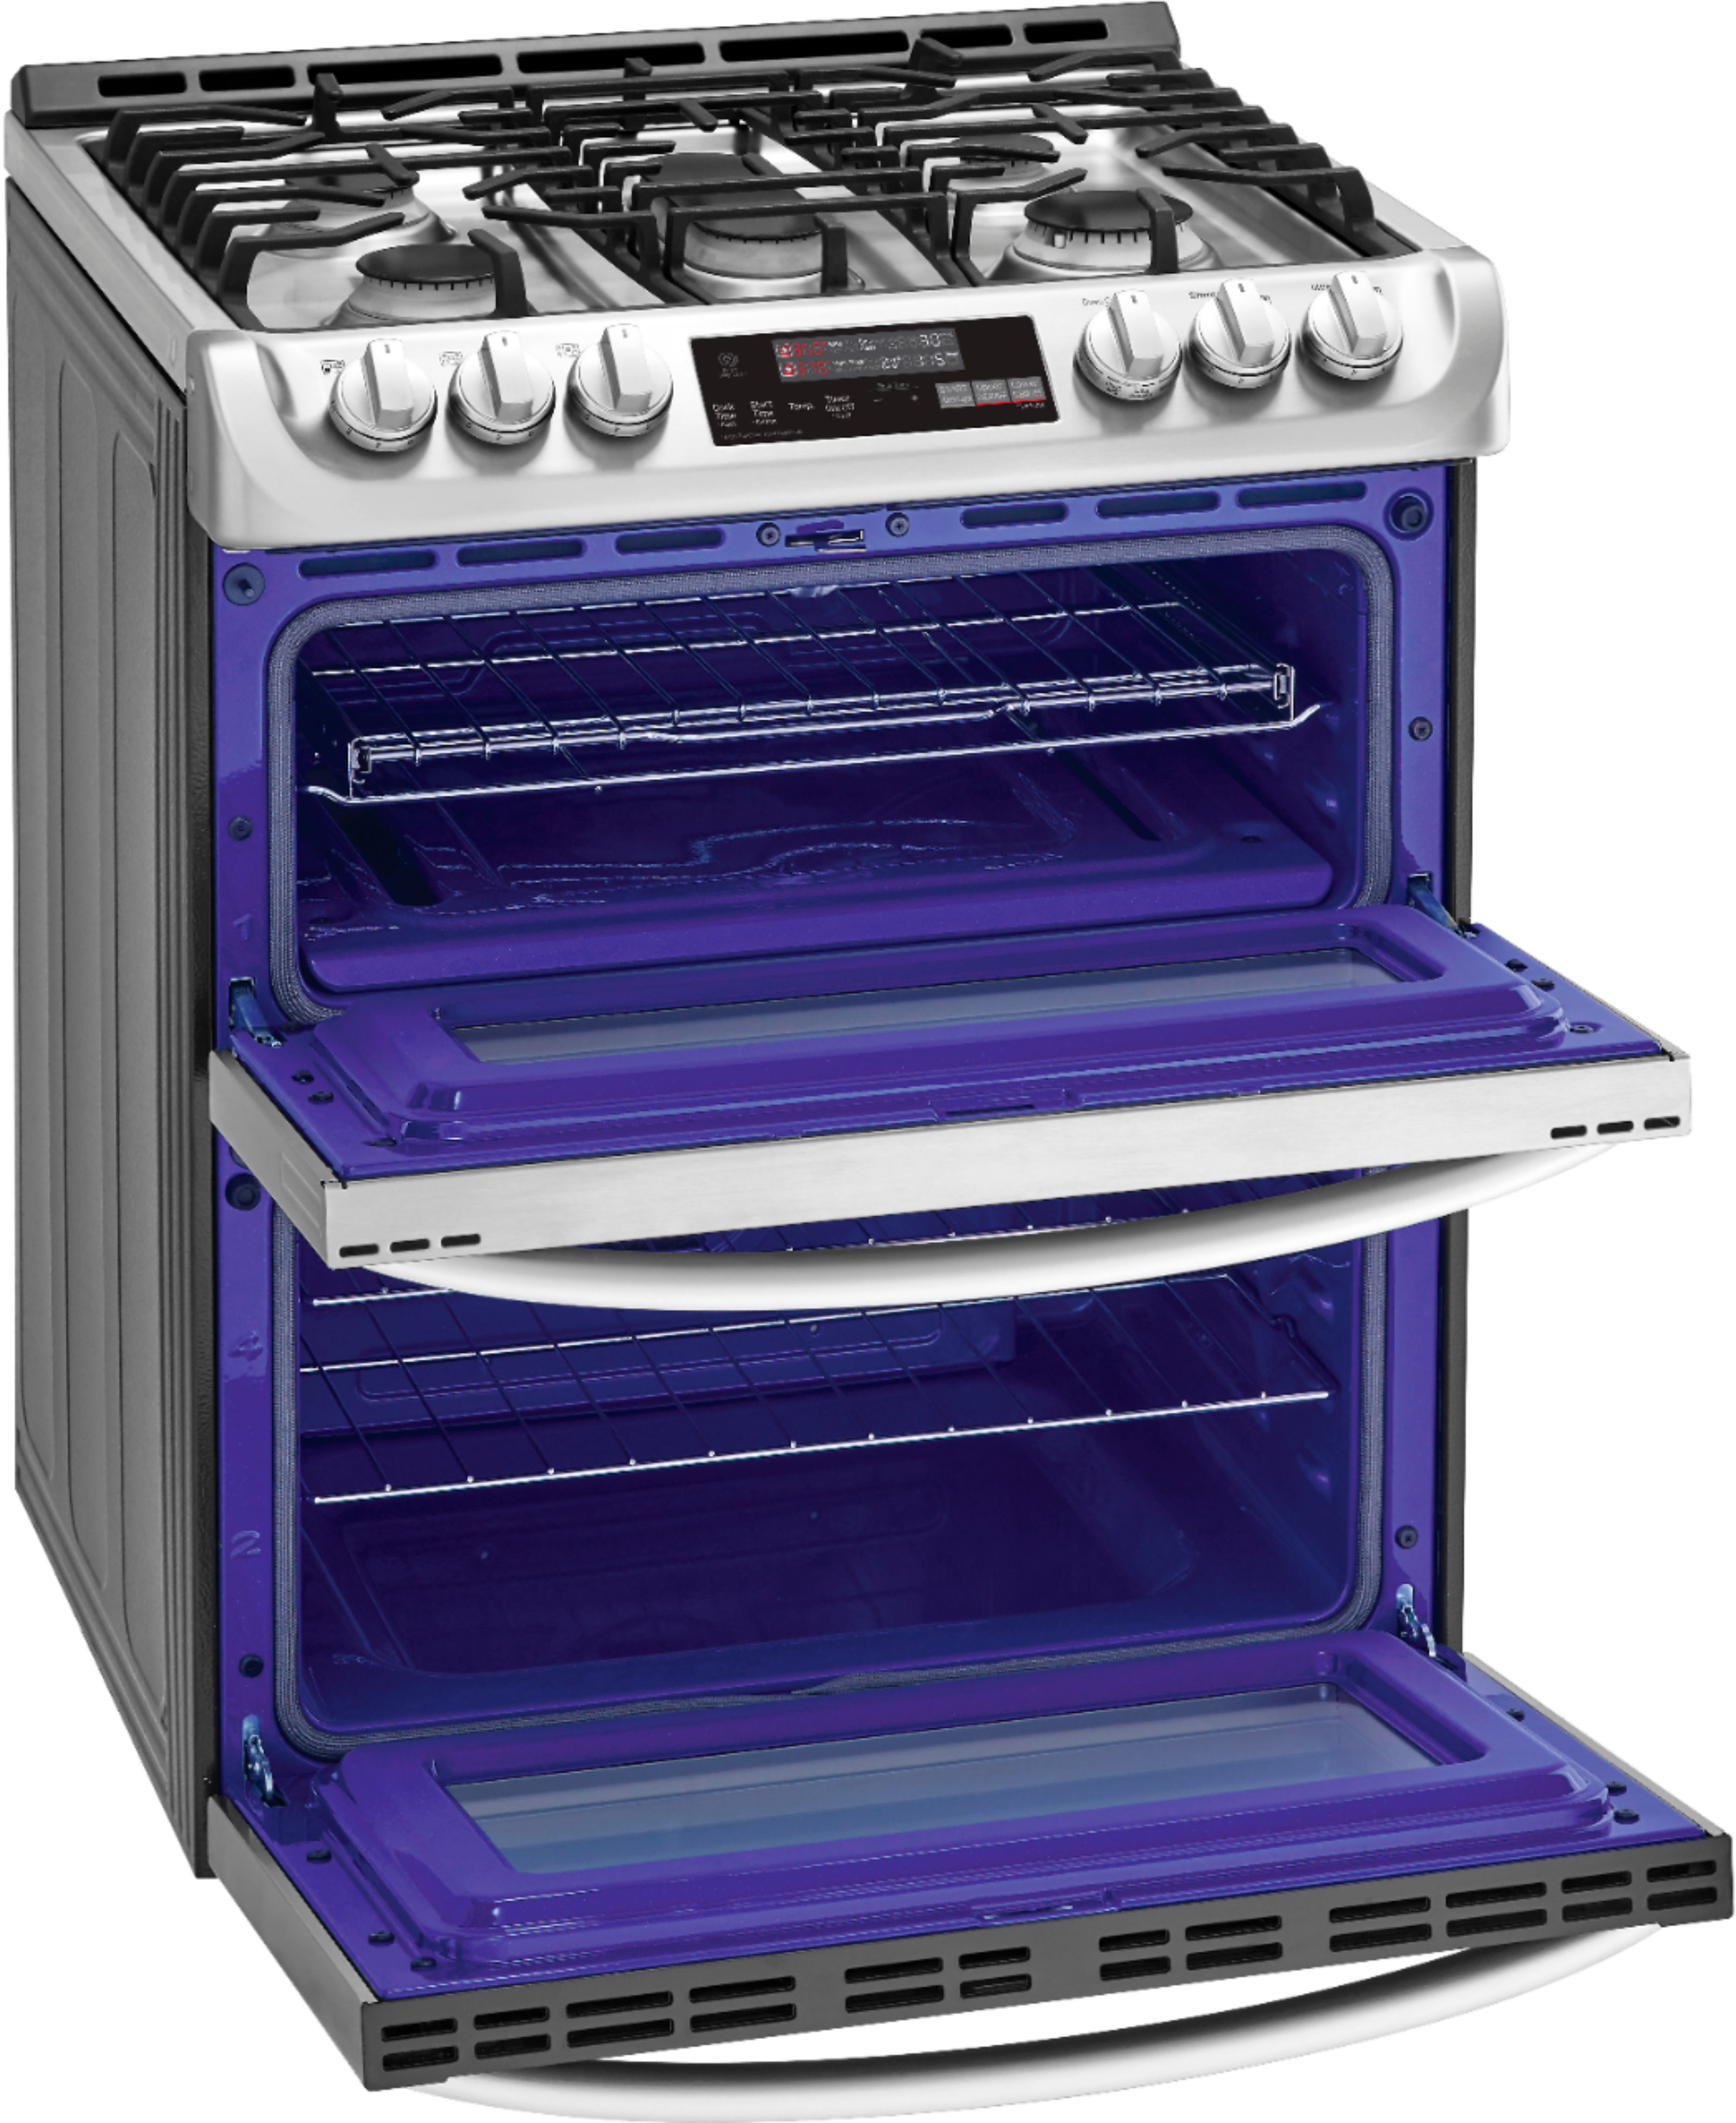 LG 6.9 cu. ft. Smart GAS Double Oven Range with Built-In Air Fry